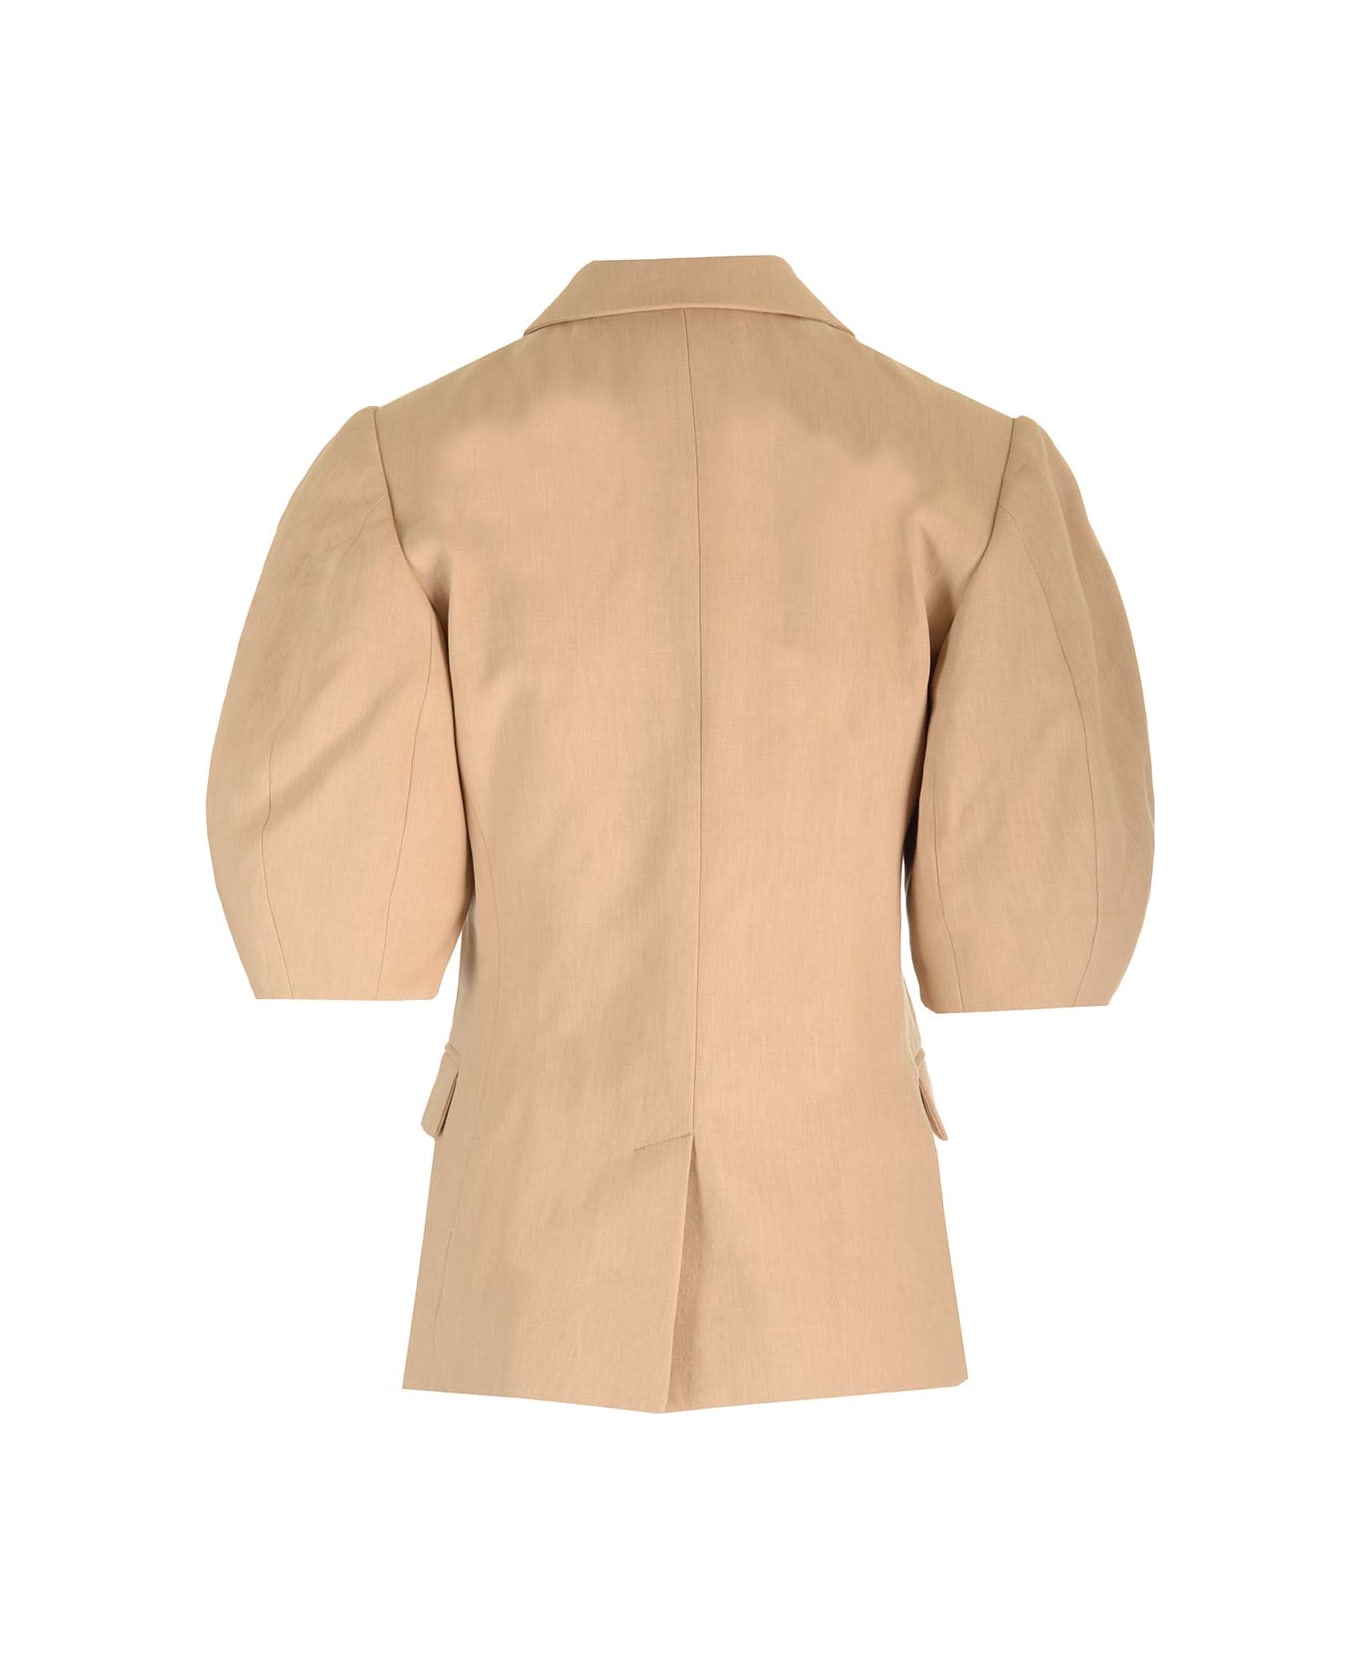 Chloé Single-breasted Jacket With Balloon Sleeves - Beige ブレザー